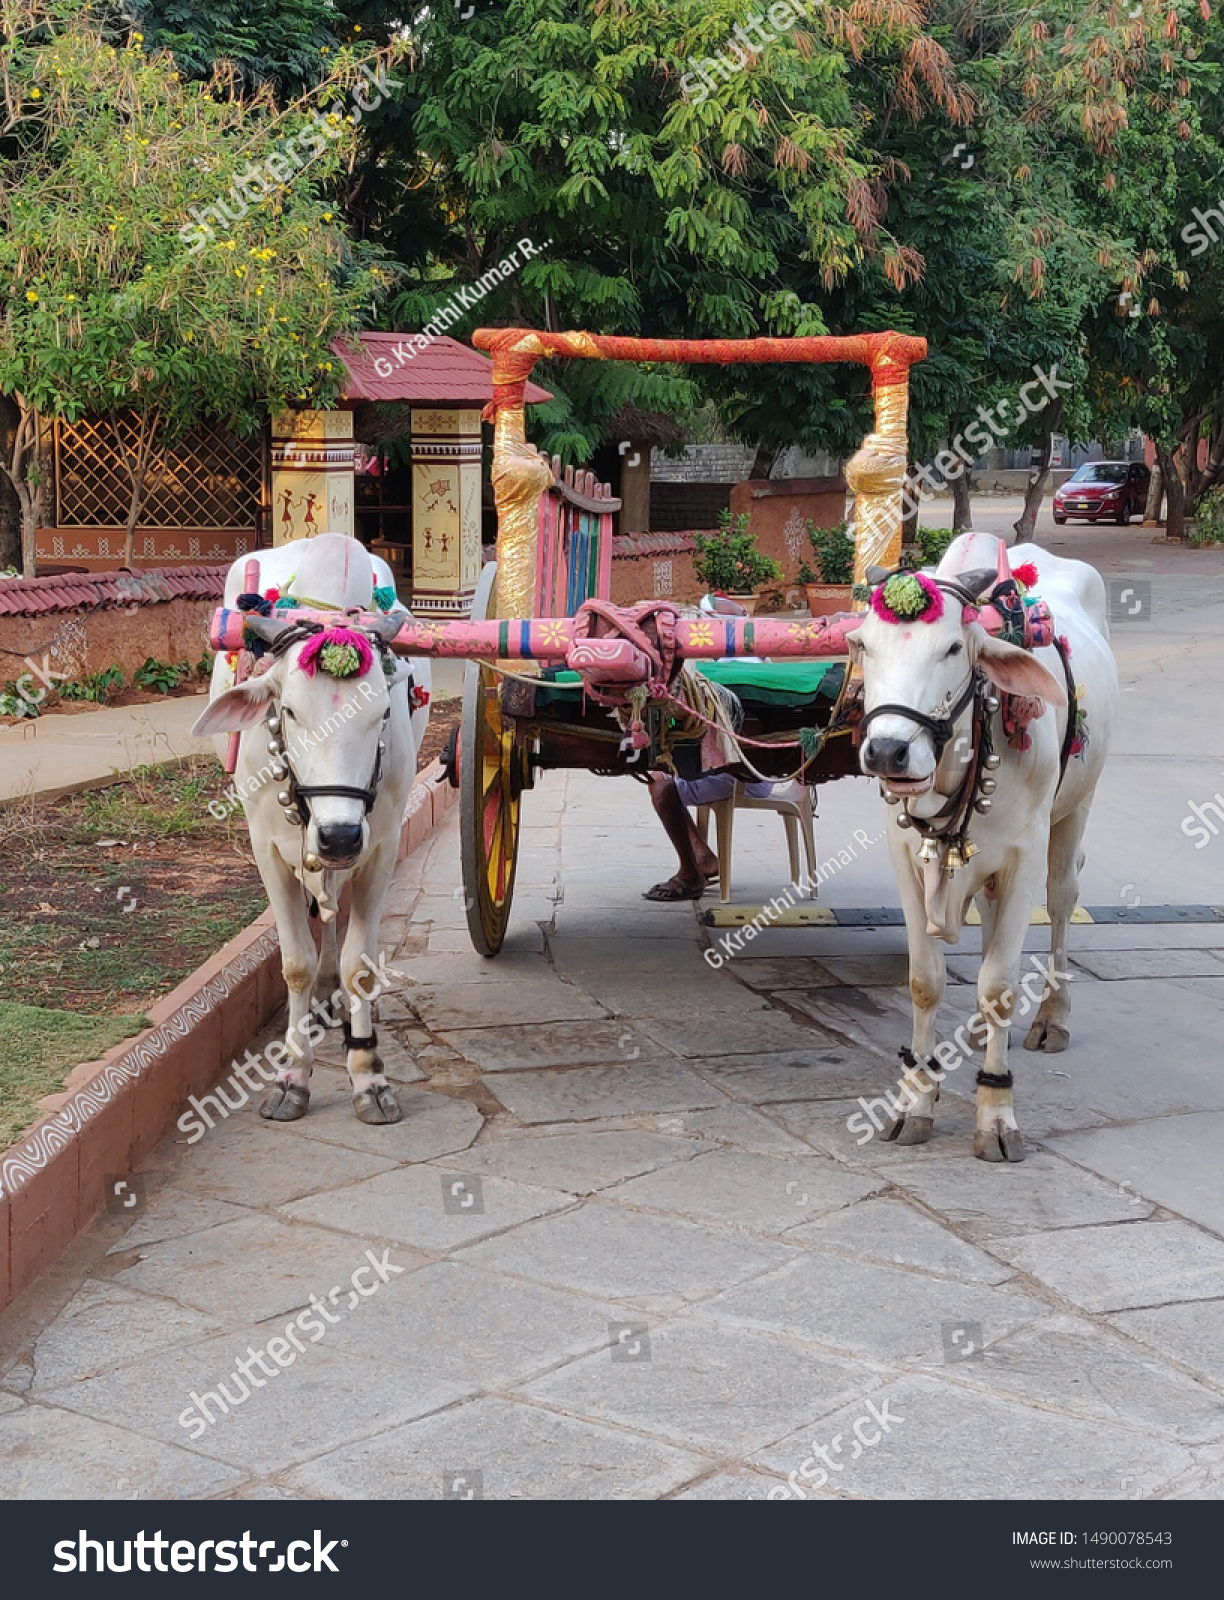 A bullock cart or ox cart is a two-wheeled or four-wheeled vehicle pulled by oxen. It is a means of transportation used since ancient times in many parts of the world.They are still used today  #1490078543